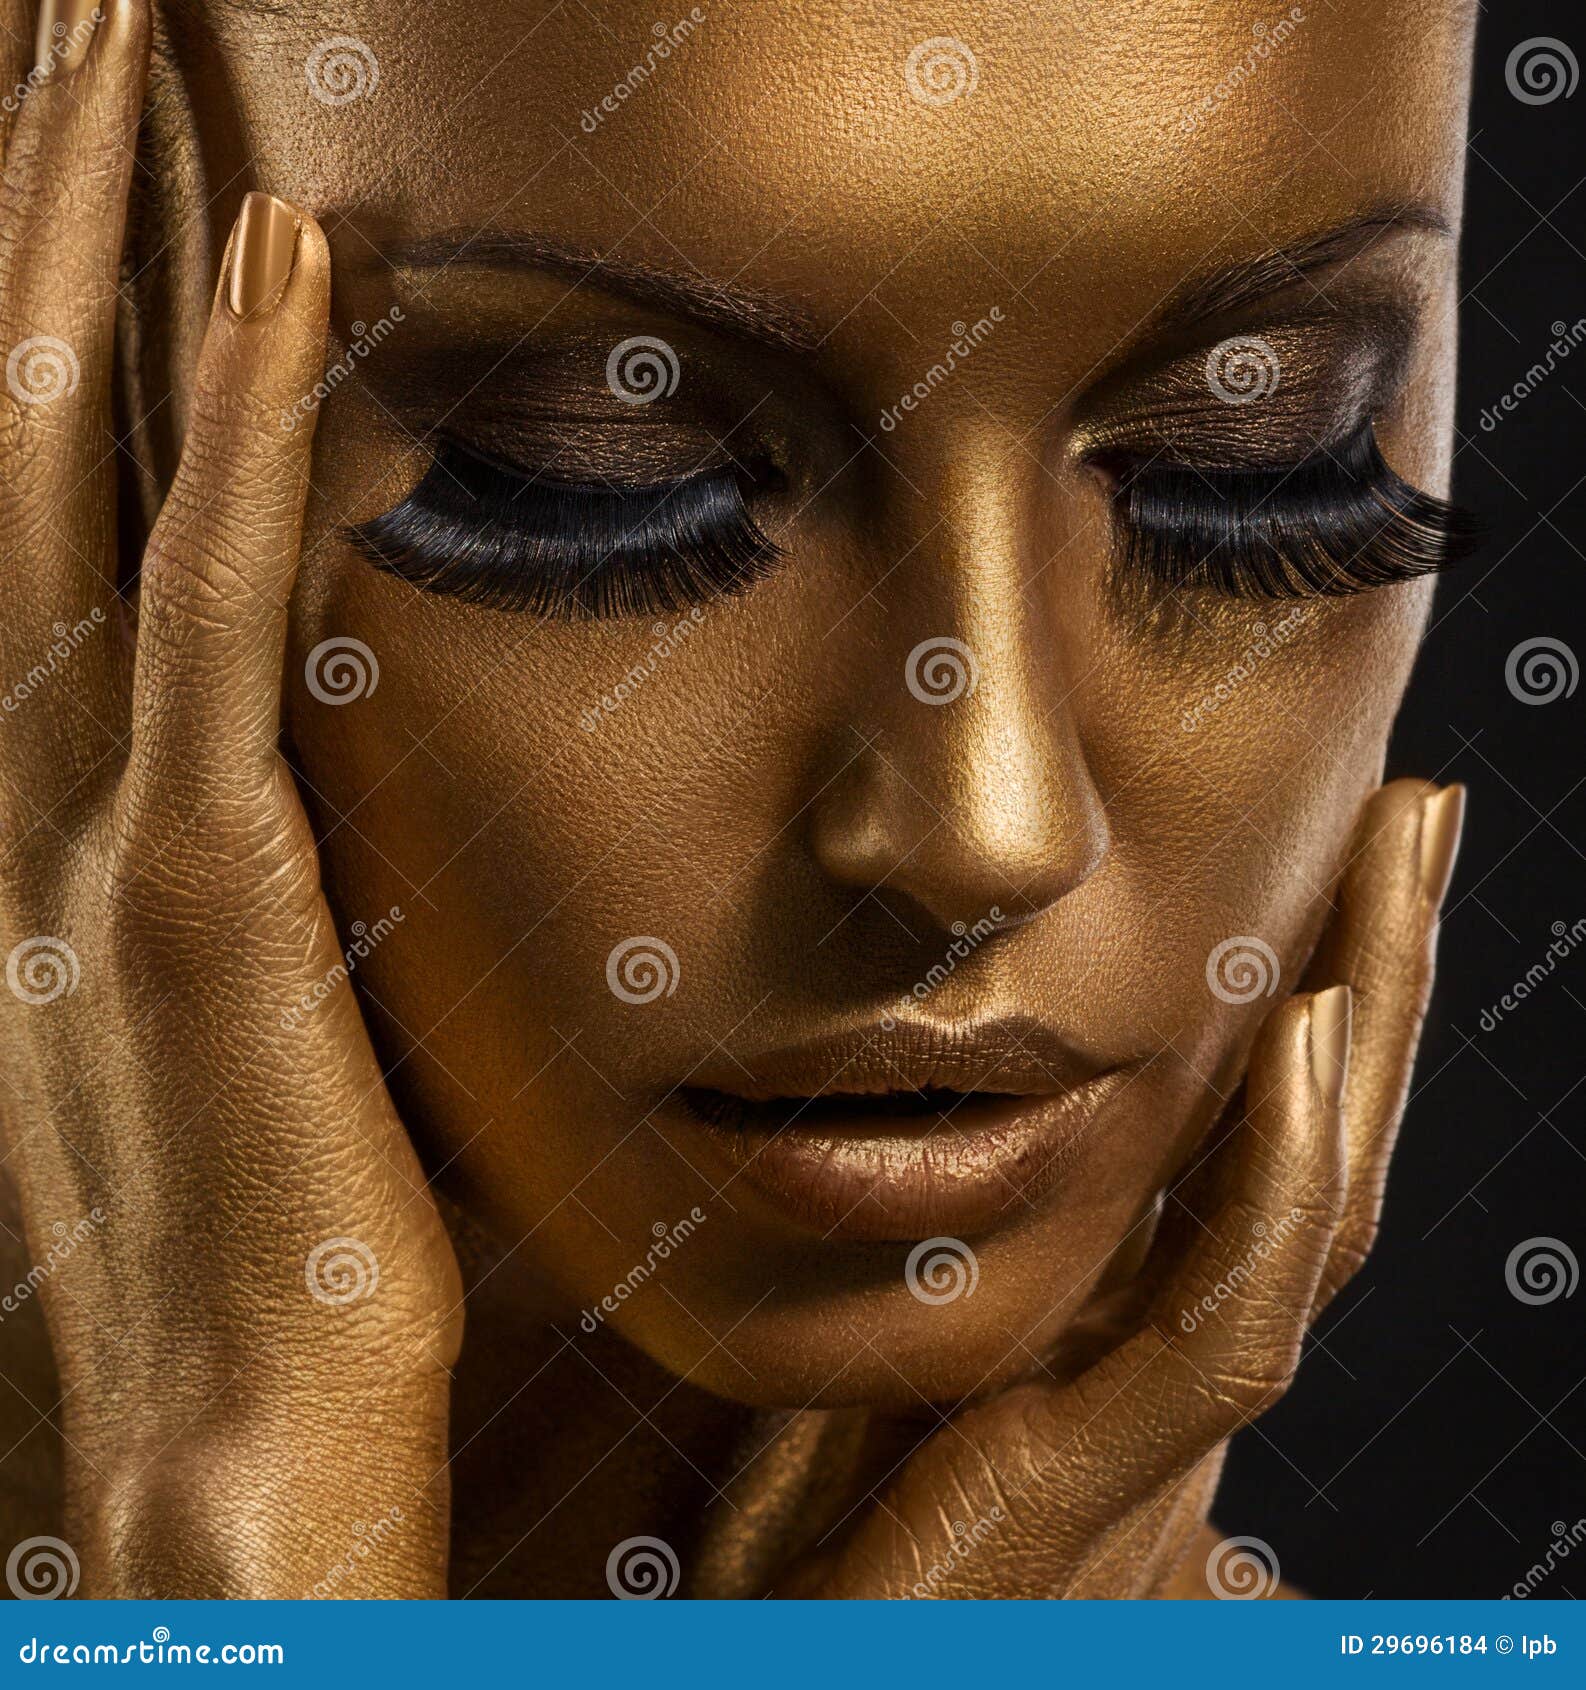 Gold Painted Woman Stock Photos and Pictures - 28,772 Images